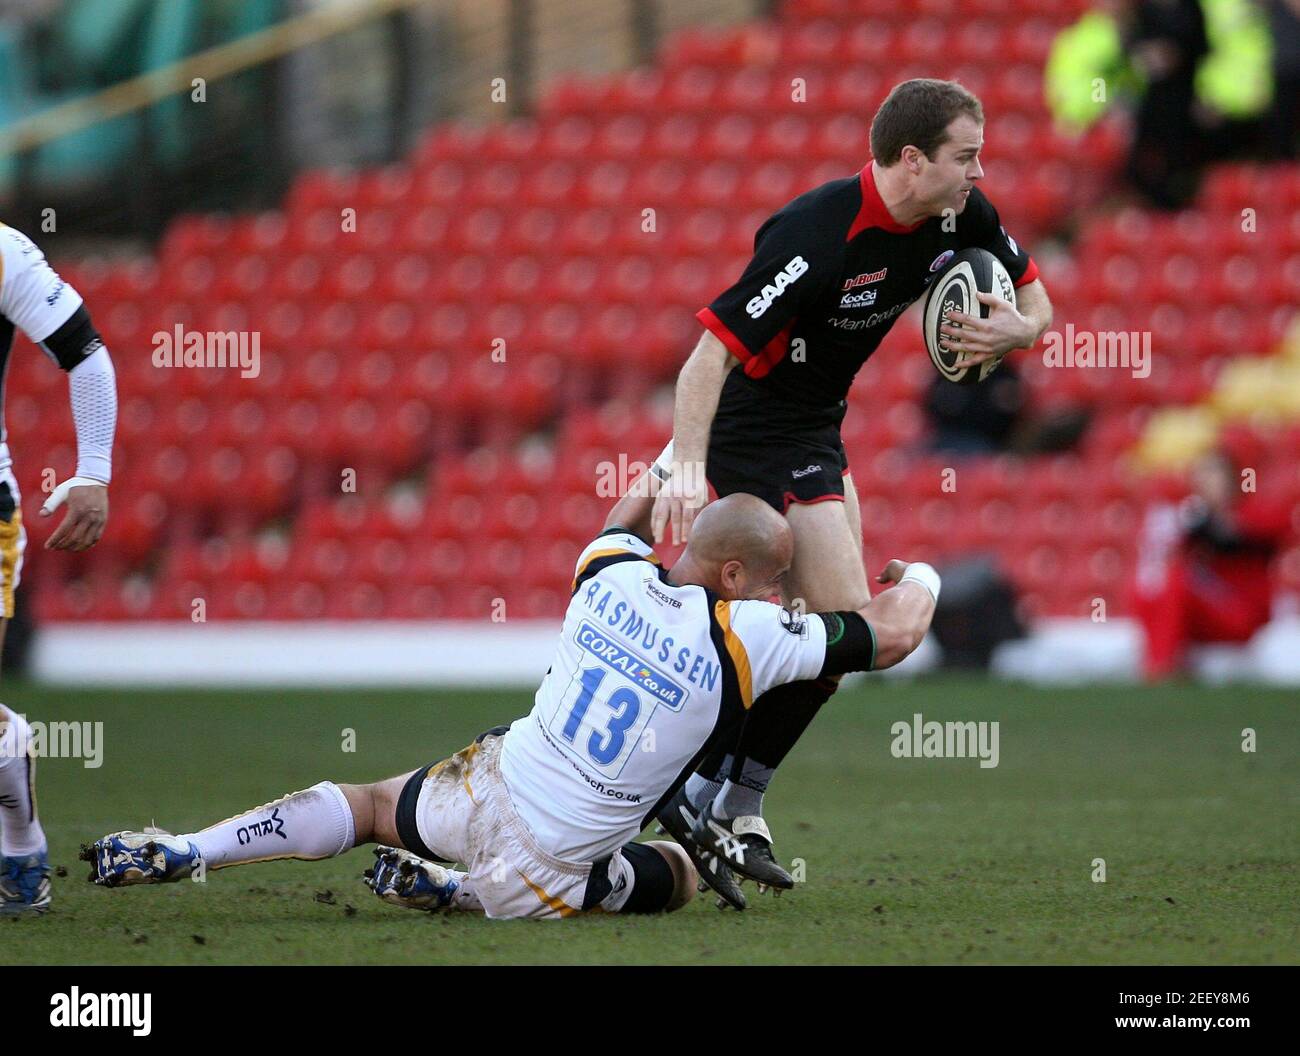 Rugby Union - Saracens v Worcester Warriors Guinness Premiership - Vicarage Road - 10/2/08 Saracens' Rodd Penny (R) is callenged by Worcester's Dale Rasmussen (L) Mandatory Action Images / Matthew Childs Livepic Stock Photo - Alamy